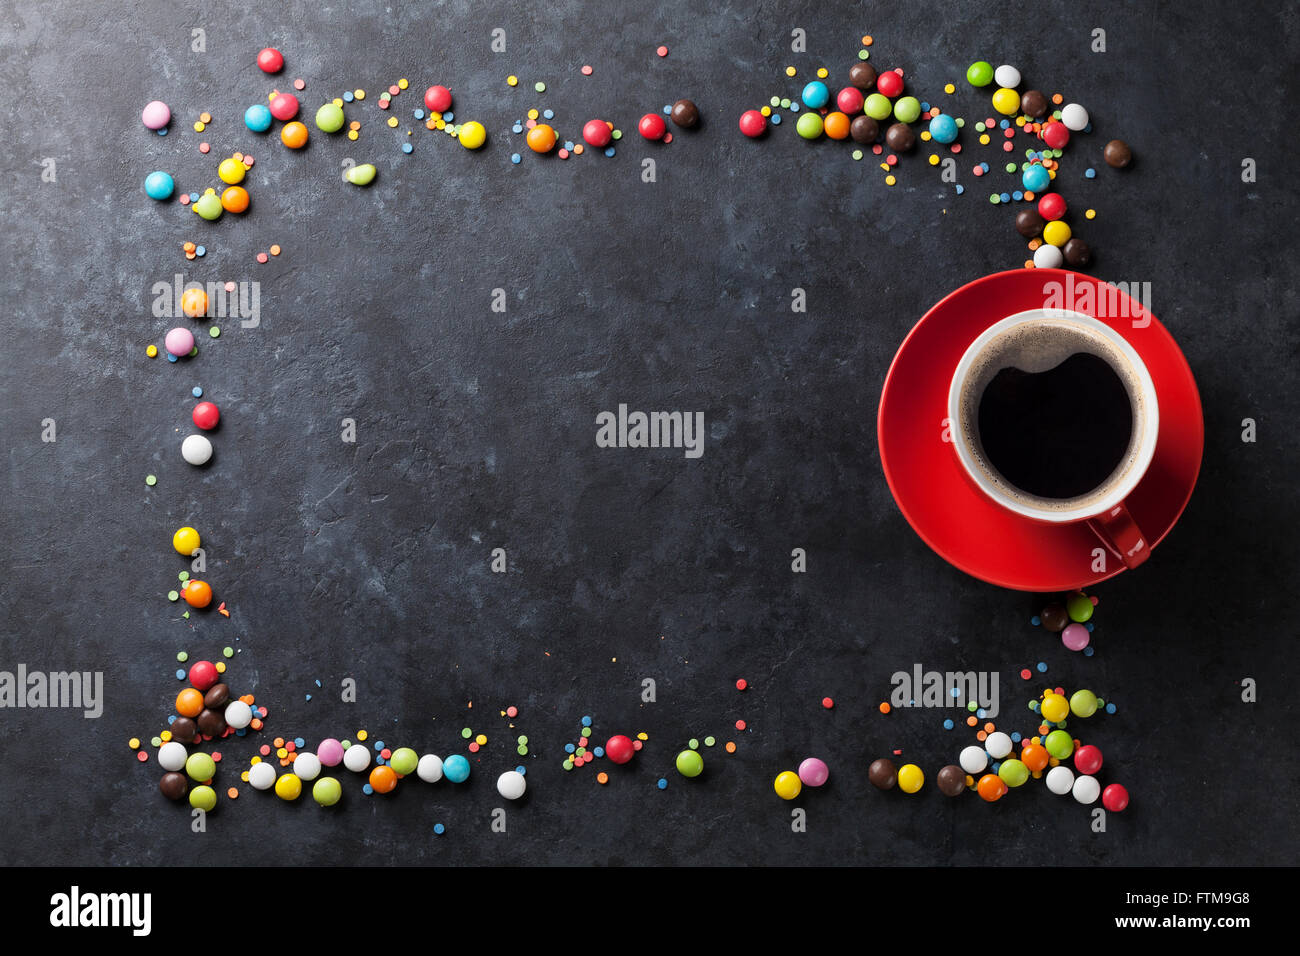 Colorful candies frame and coffee cup on stone background. Top view with copy space Stock Photo